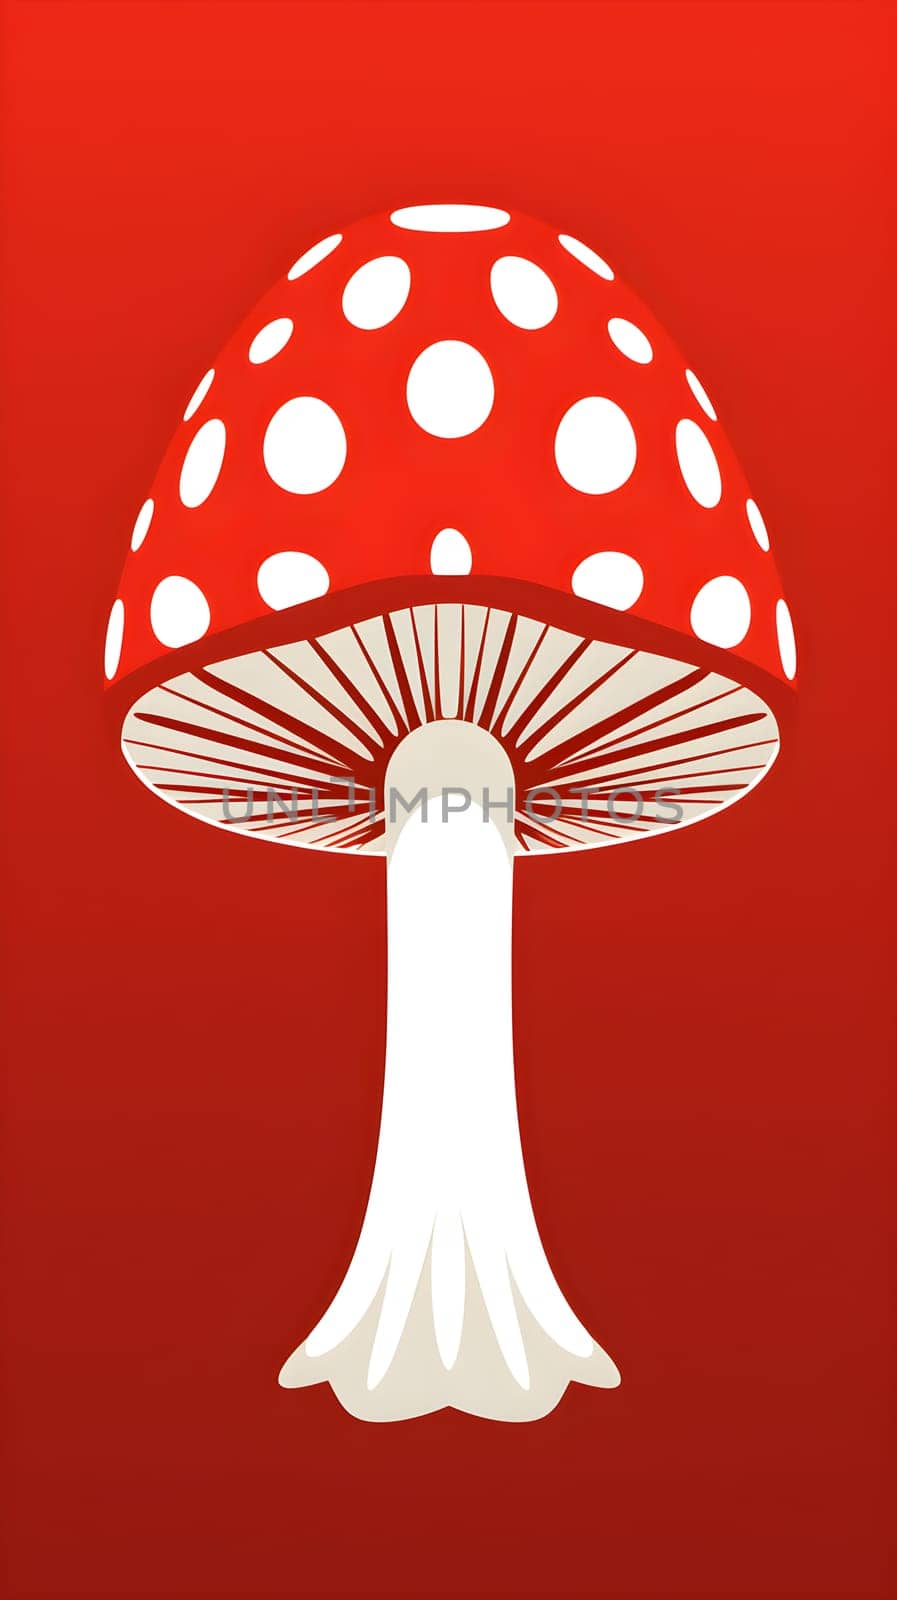 A red and white mushroom illustration - Fly Agaric - Amanita muscaria by chrisroll